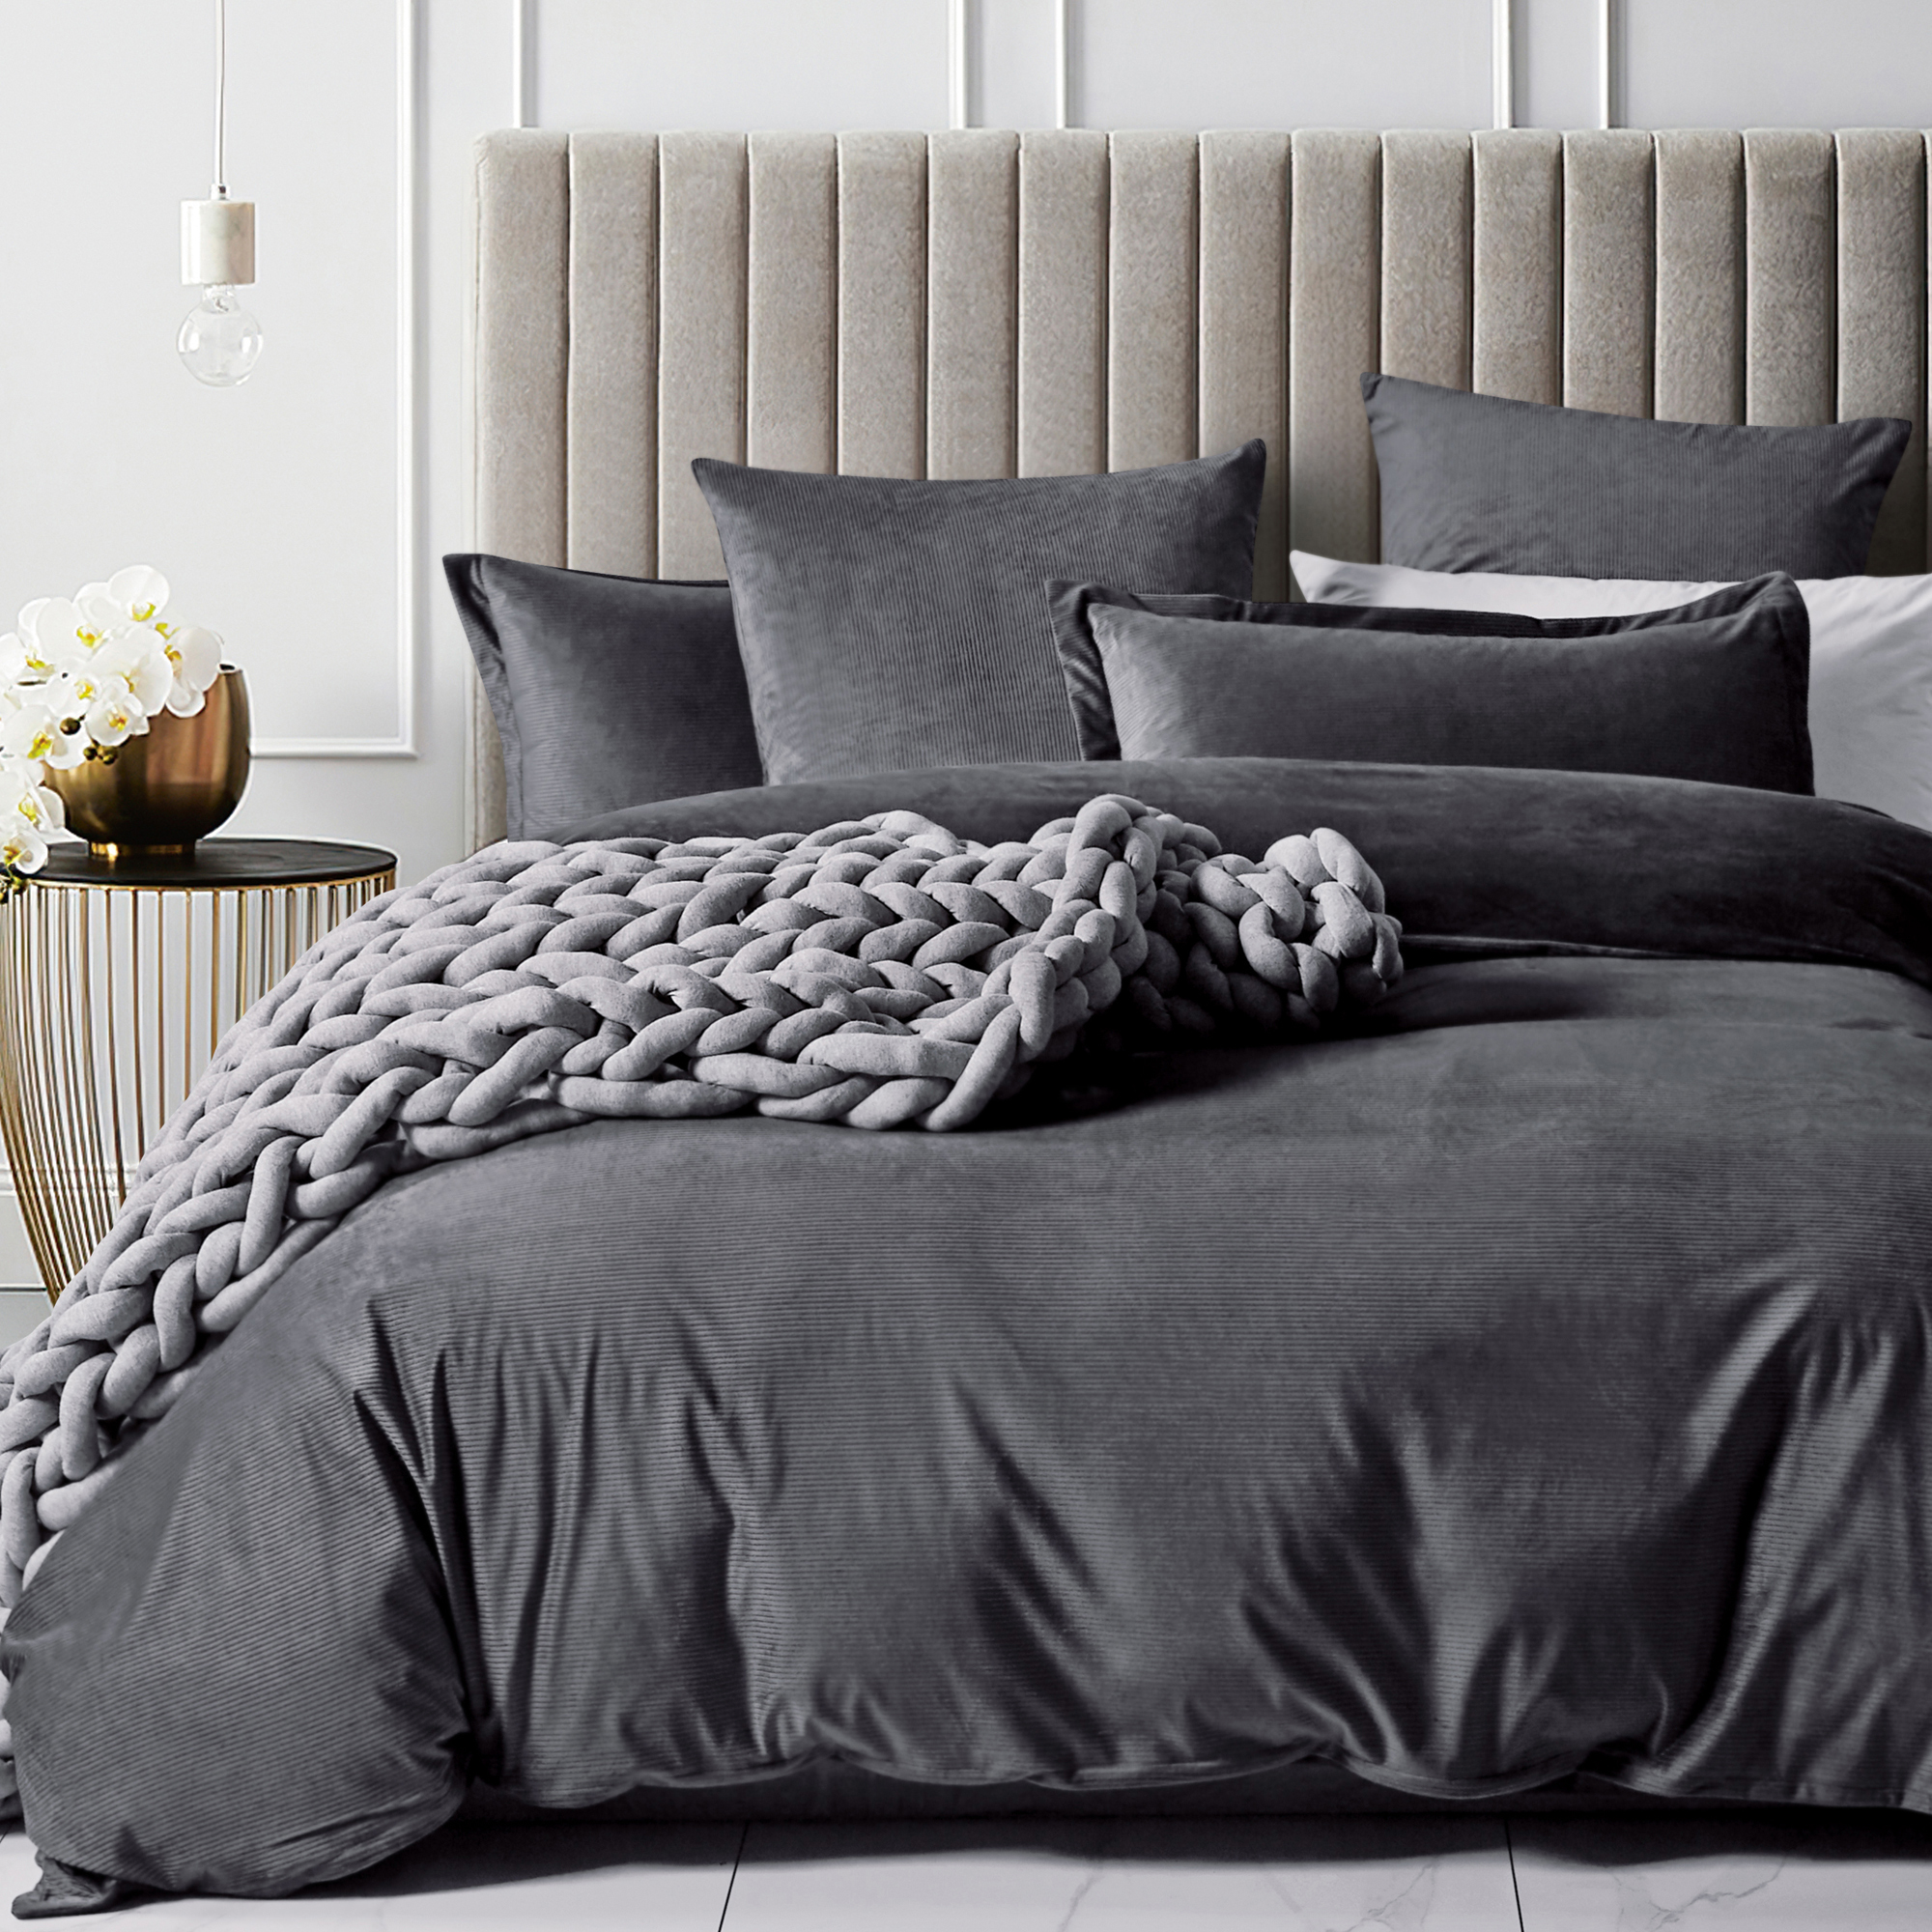 Temple Webster, Charcoal Duvet Cover Queen